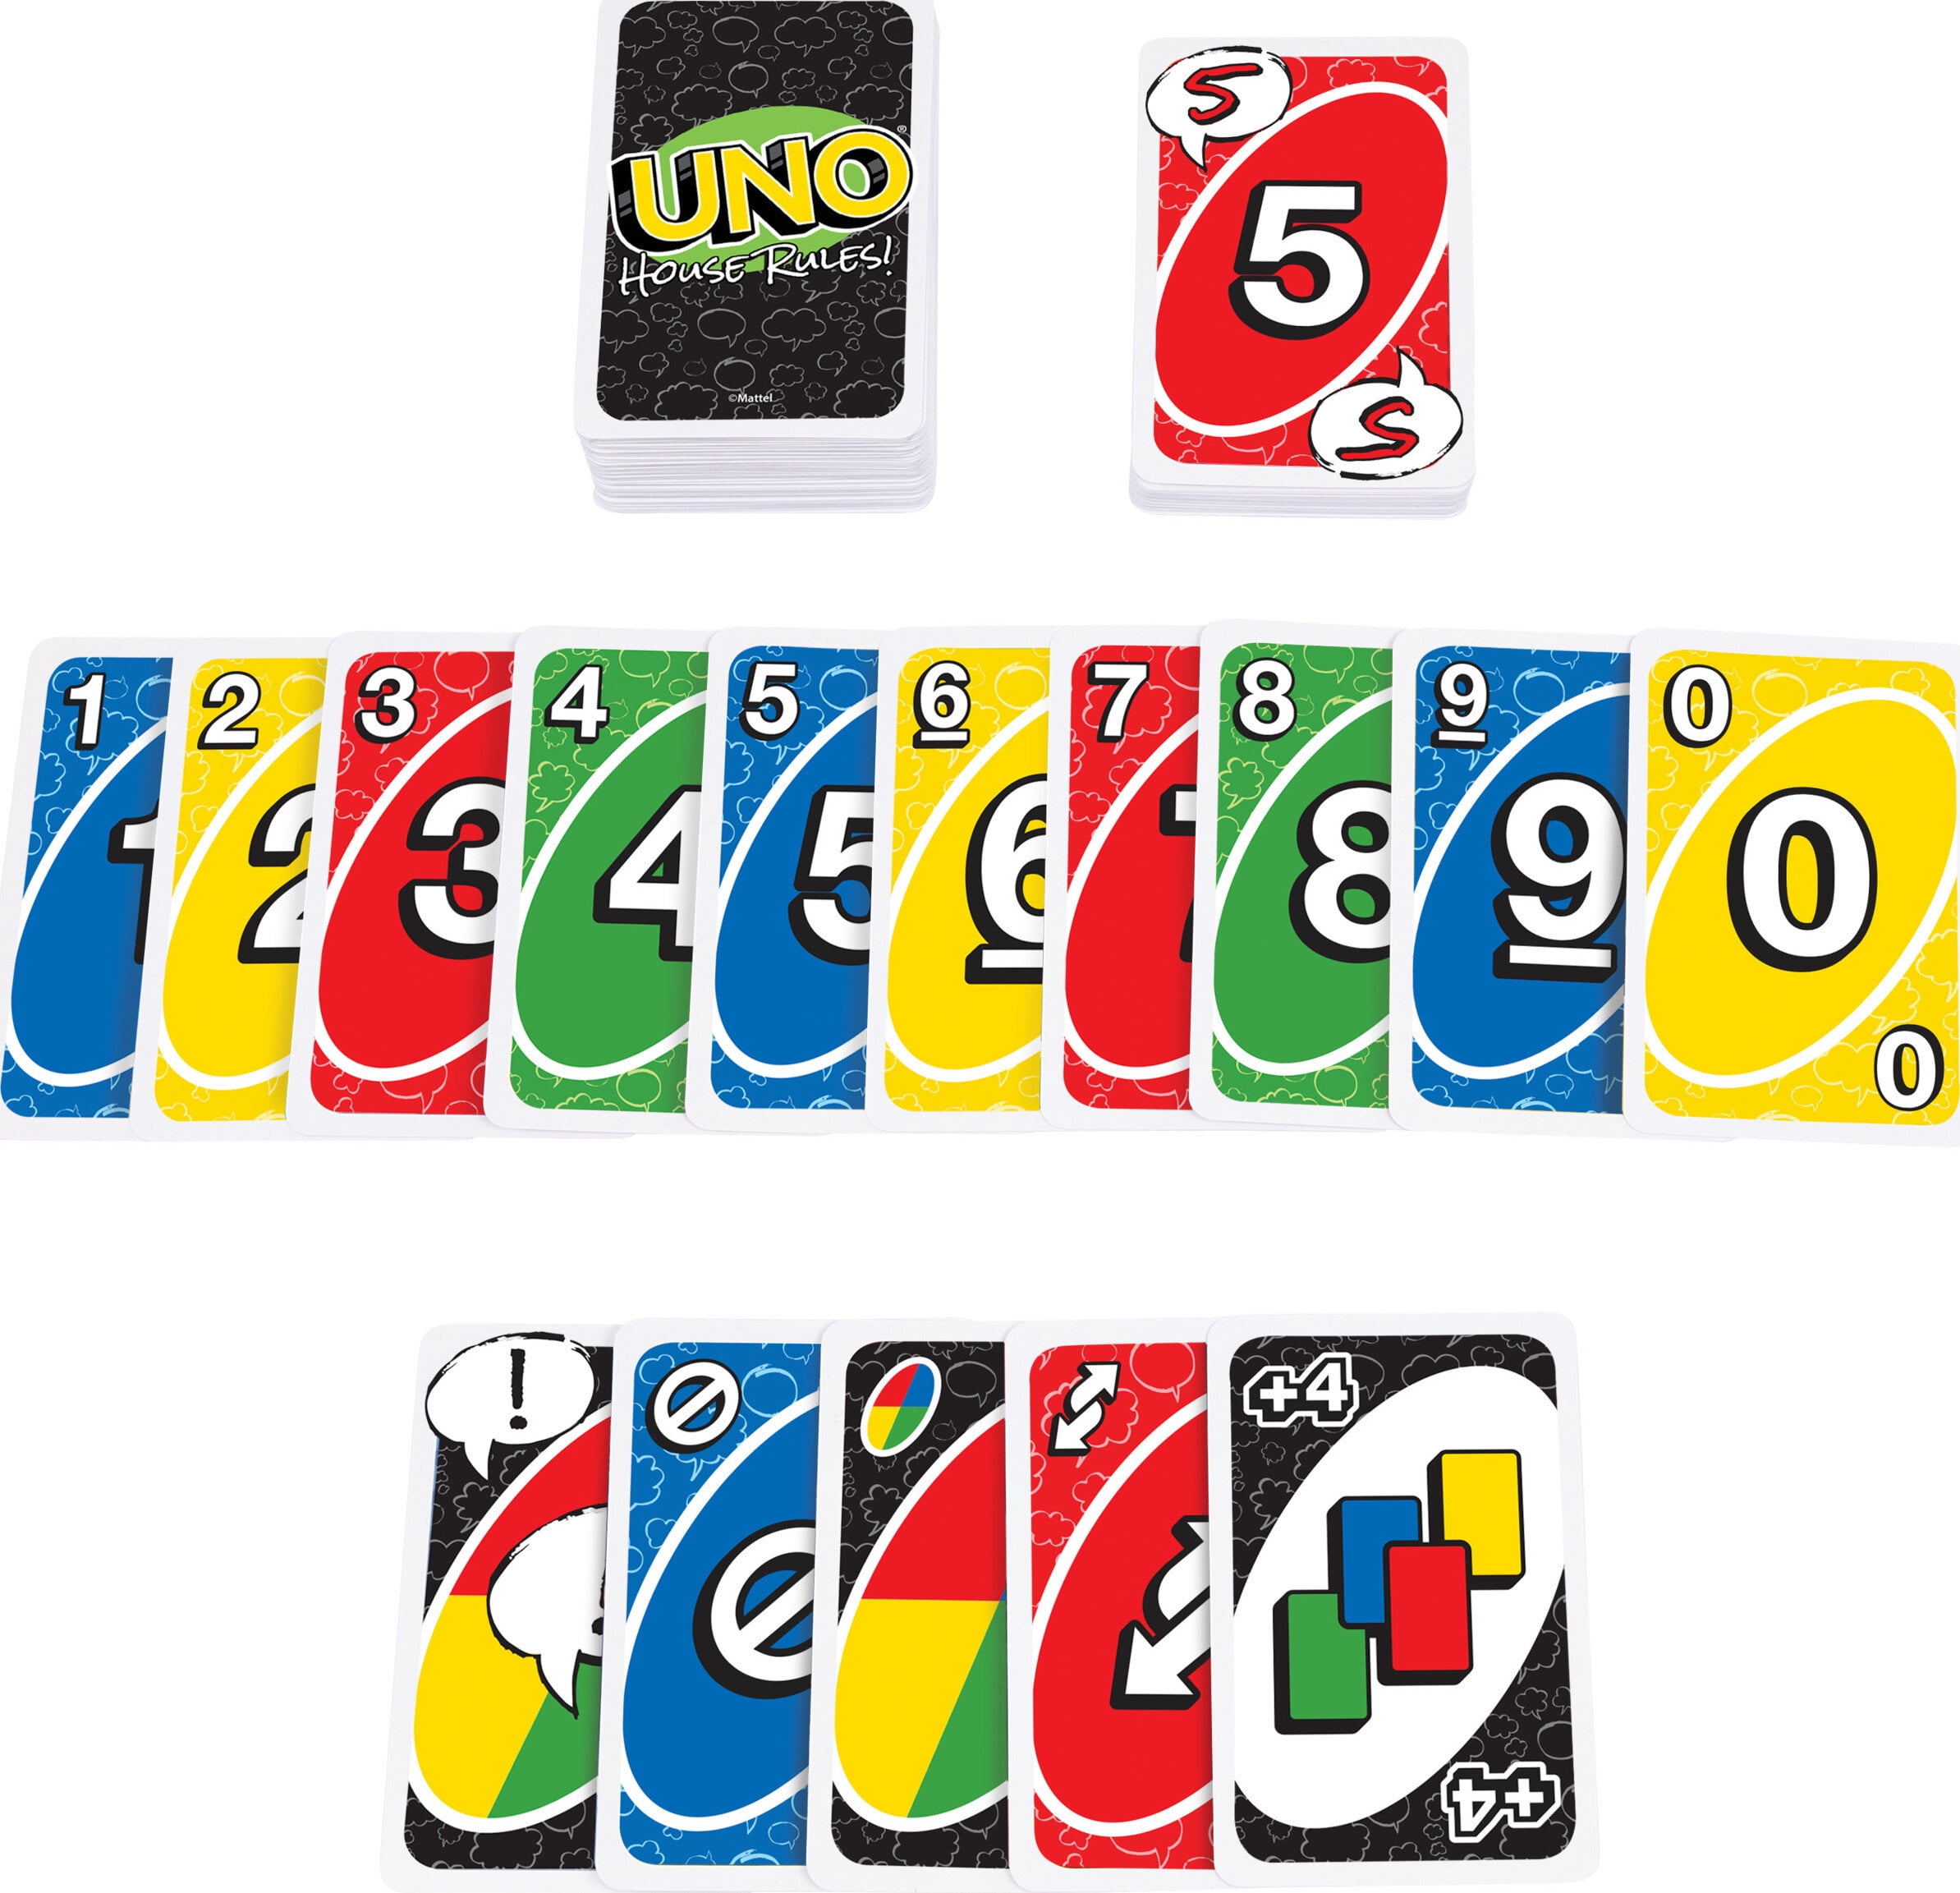 UNO House Rules, Board Game